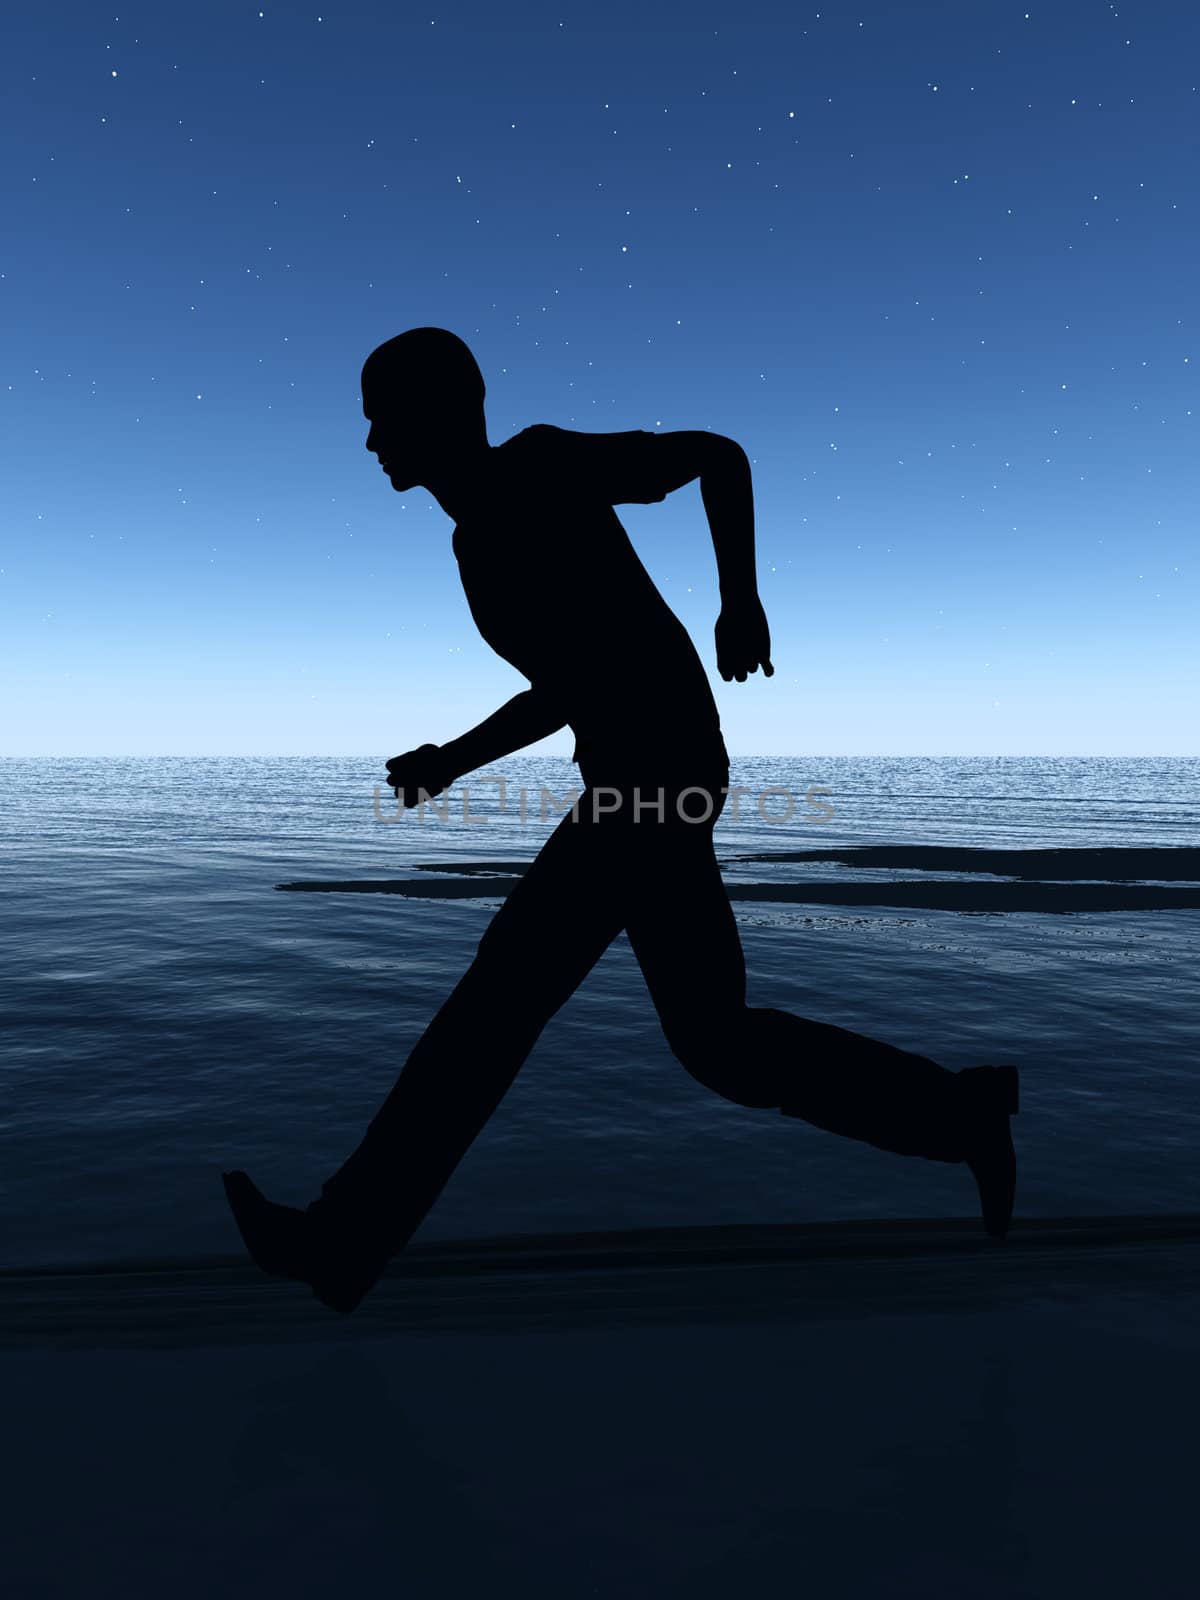 A male runner running on a coastline at night.